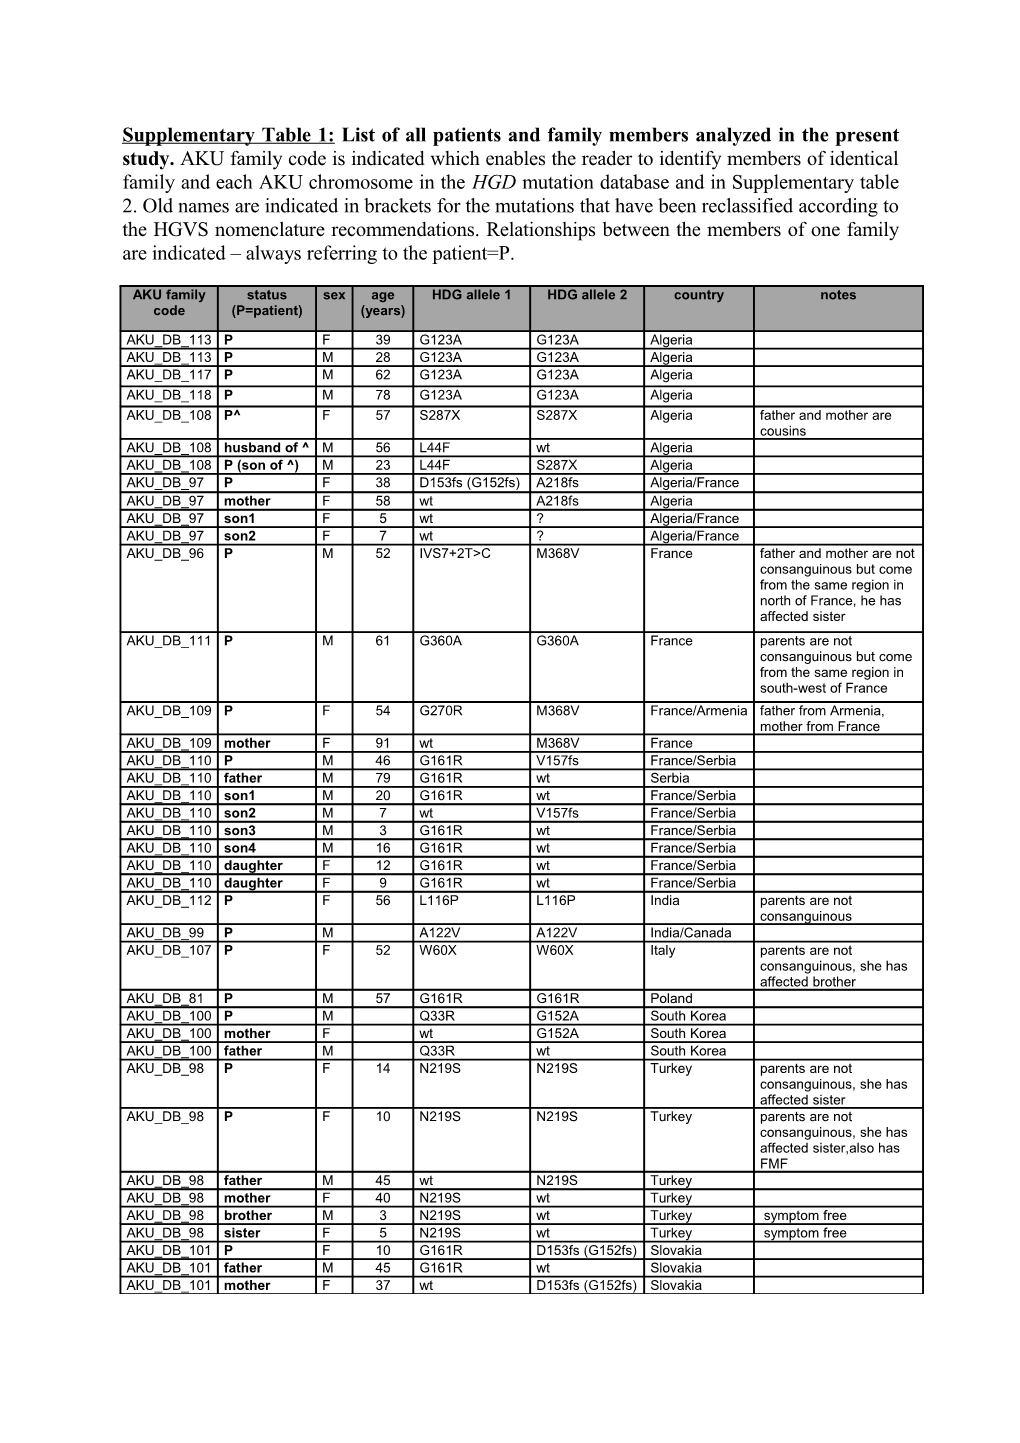 Supplementary Table 1: List of All Patients and Family Members Analyzed in the Present